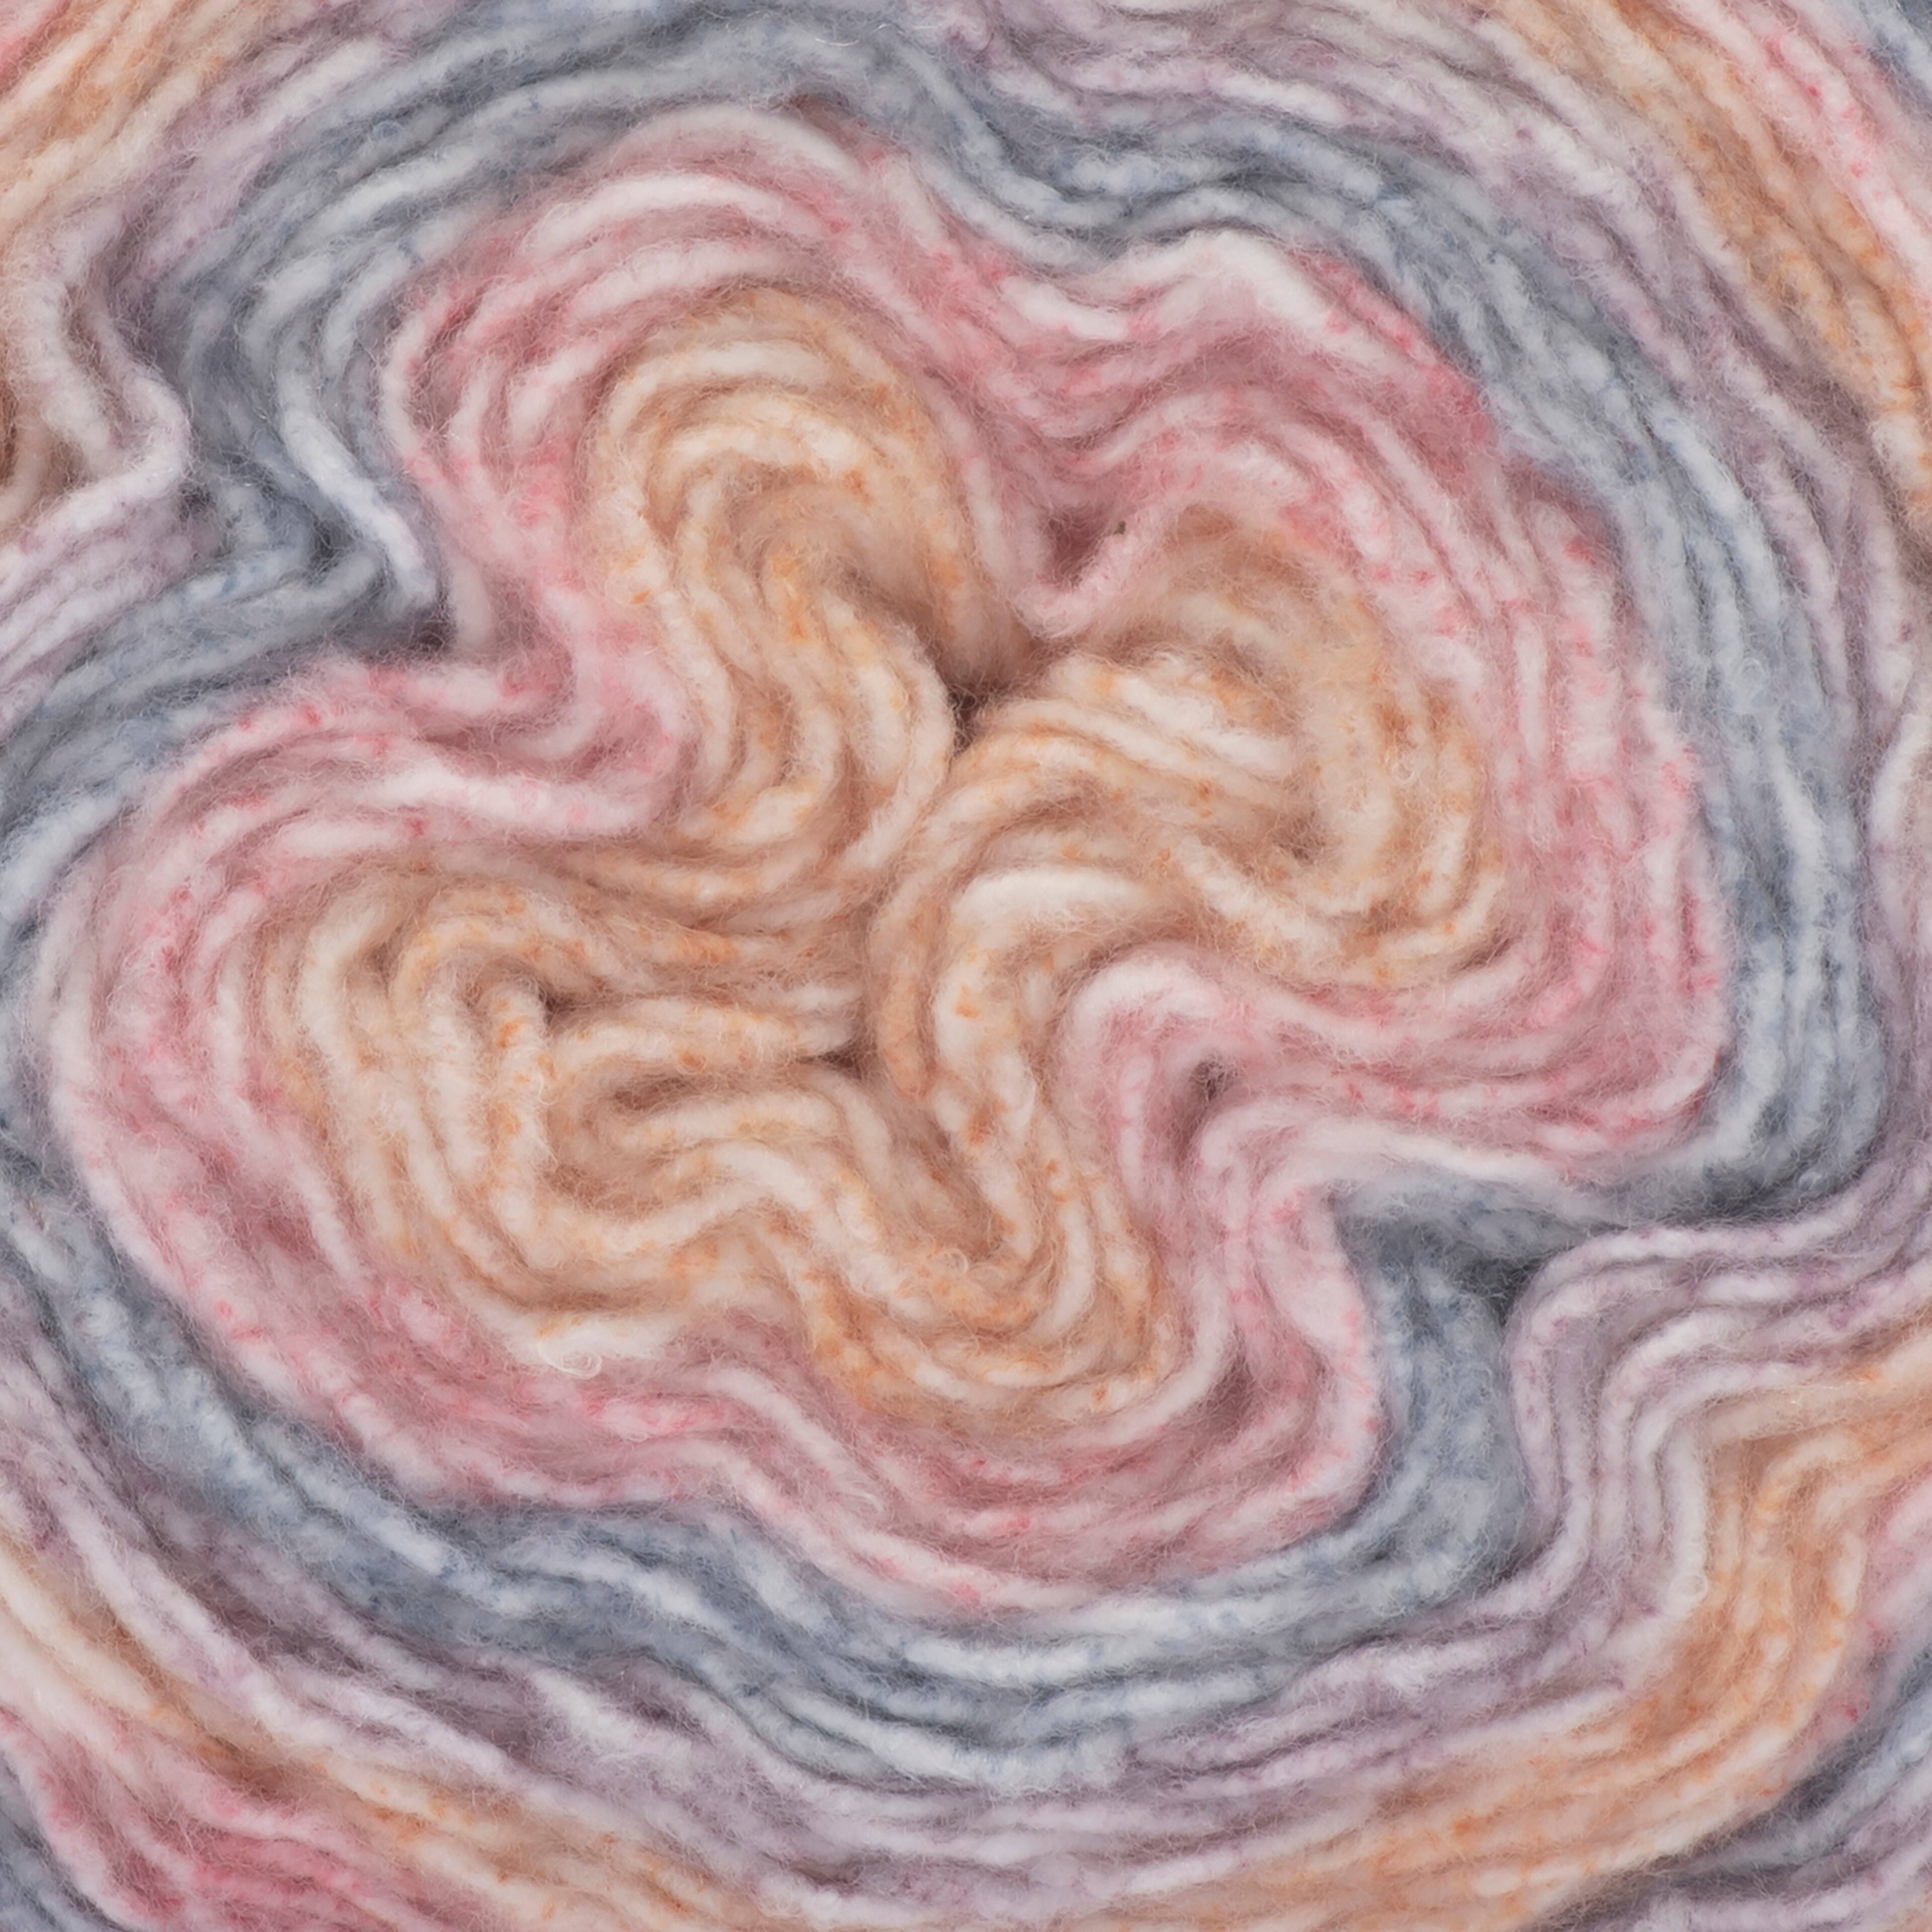 Caron Cloud Cakes Yarn, 760yds/695m Super Soft/Fluffy Yarn-Variety of  Colours to Choose from